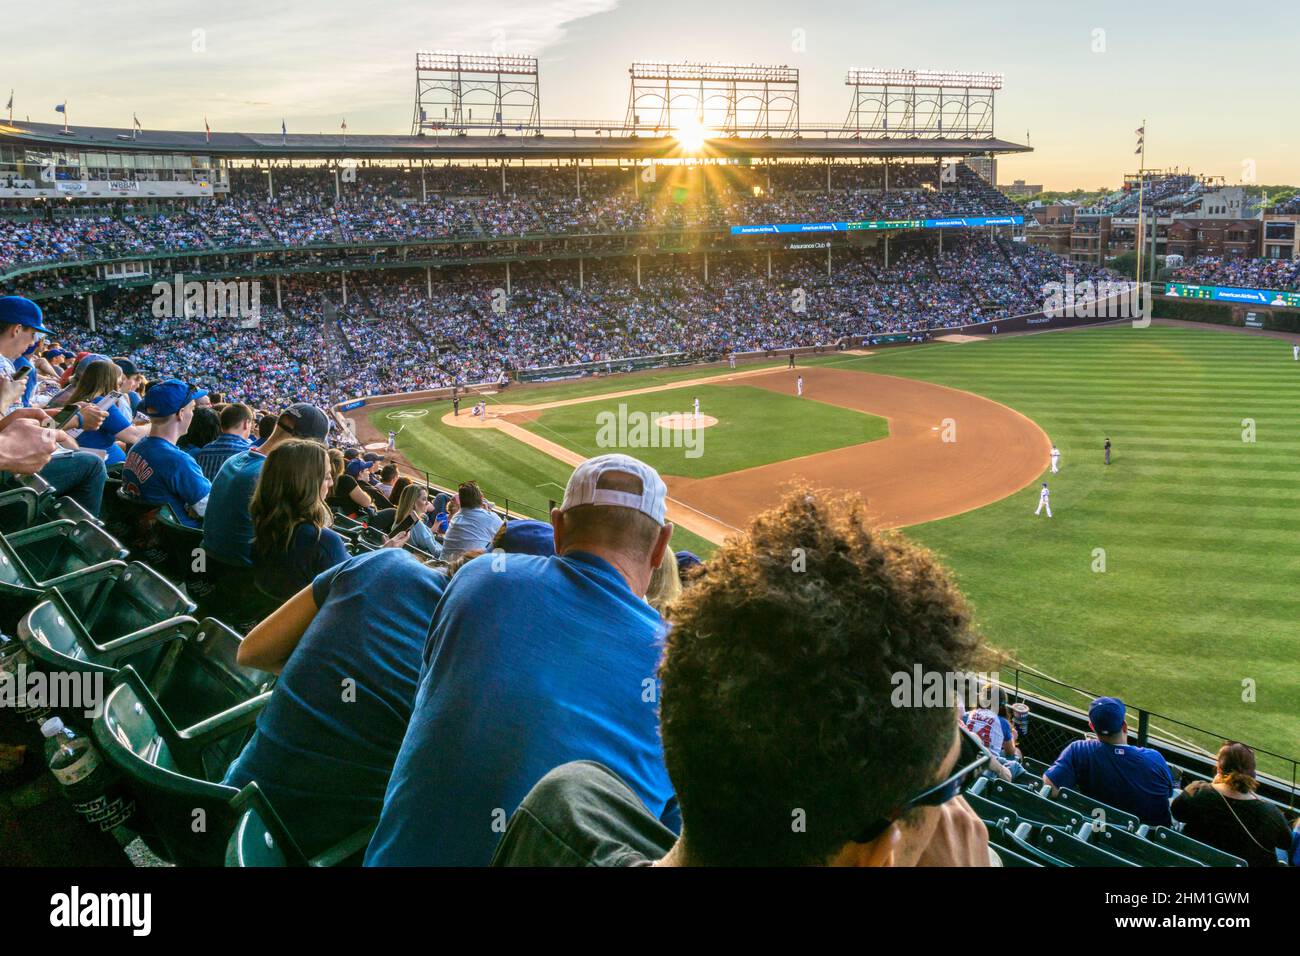 The crowd at a baseball game at Wrigley Field, Chicago, the home of the Chicago Cubs. Cubs playing LA Dodgers. Stock Photo